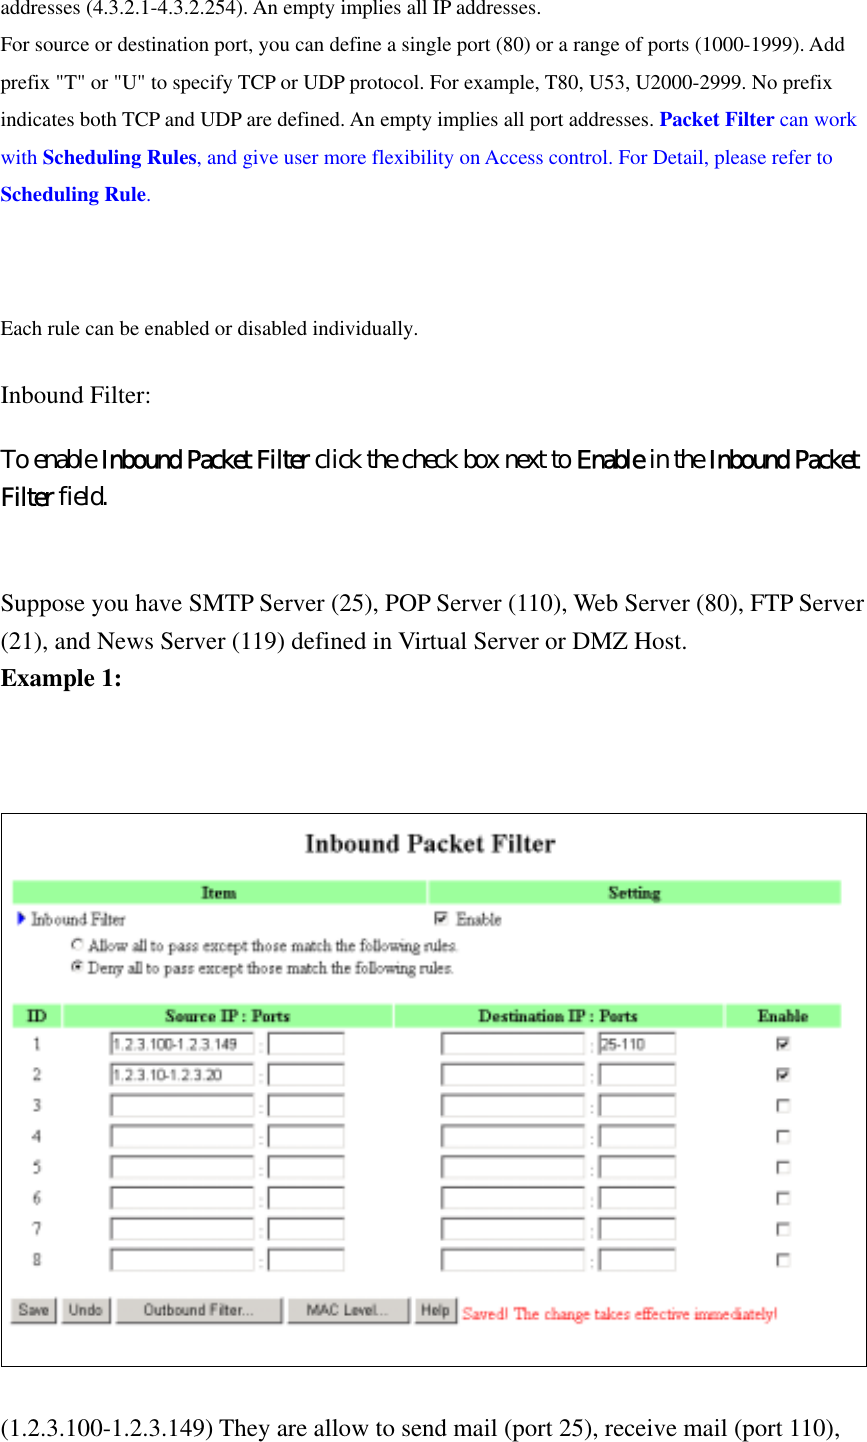 addresses (4.3.2.1-4.3.2.254). An empty implies all IP addresses.   For source or destination port, you can define a single port (80) or a range of ports (1000-1999). Add prefix &quot;T&quot; or &quot;U&quot; to specify TCP or UDP protocol. For example, T80, U53, U2000-2999. No prefix indicates both TCP and UDP are defined. An empty implies all port addresses. Packet Filter can work with Scheduling Rules, and give user more flexibility on Access control. For Detail, please refer to Scheduling Rule.  Each rule can be enabled or disabled individually. Inbound Filter:   To enable Inbound Packet Filter click the check box next to Enable in the Inbound Packet Filter field.  Suppose you have SMTP Server (25), POP Server (110), Web Server (80), FTP Server (21), and News Server (119) defined in Virtual Server or DMZ Host. Example 1:     (1.2.3.100-1.2.3.149) They are allow to send mail (port 25), receive mail (port 110), 